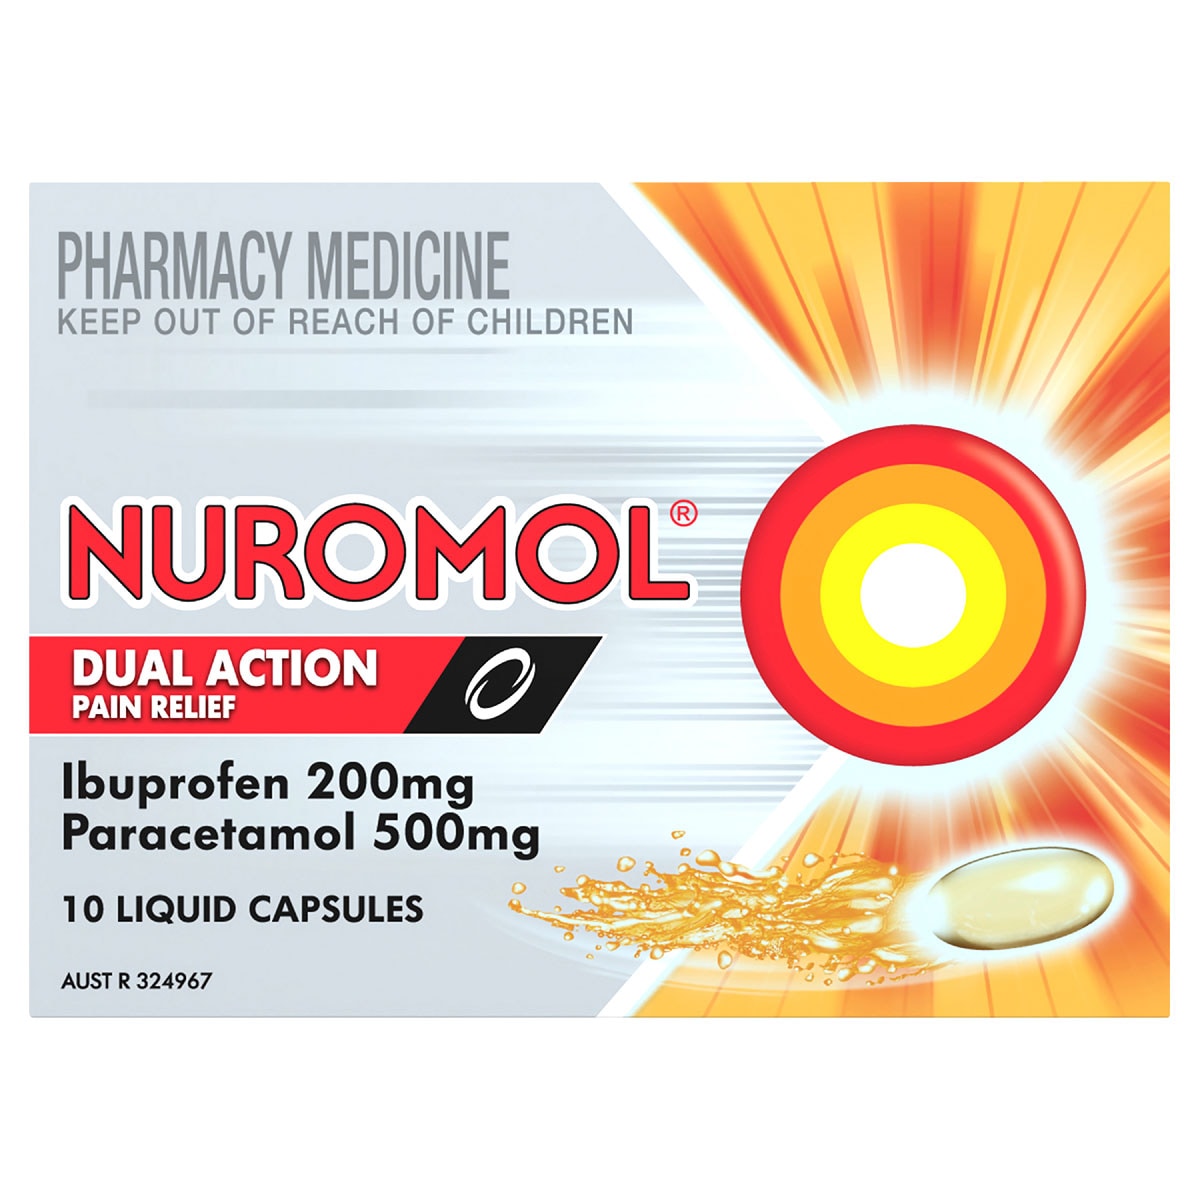 Nuromol Dual Action Strong Pain Relief 10 Liquid Capsules